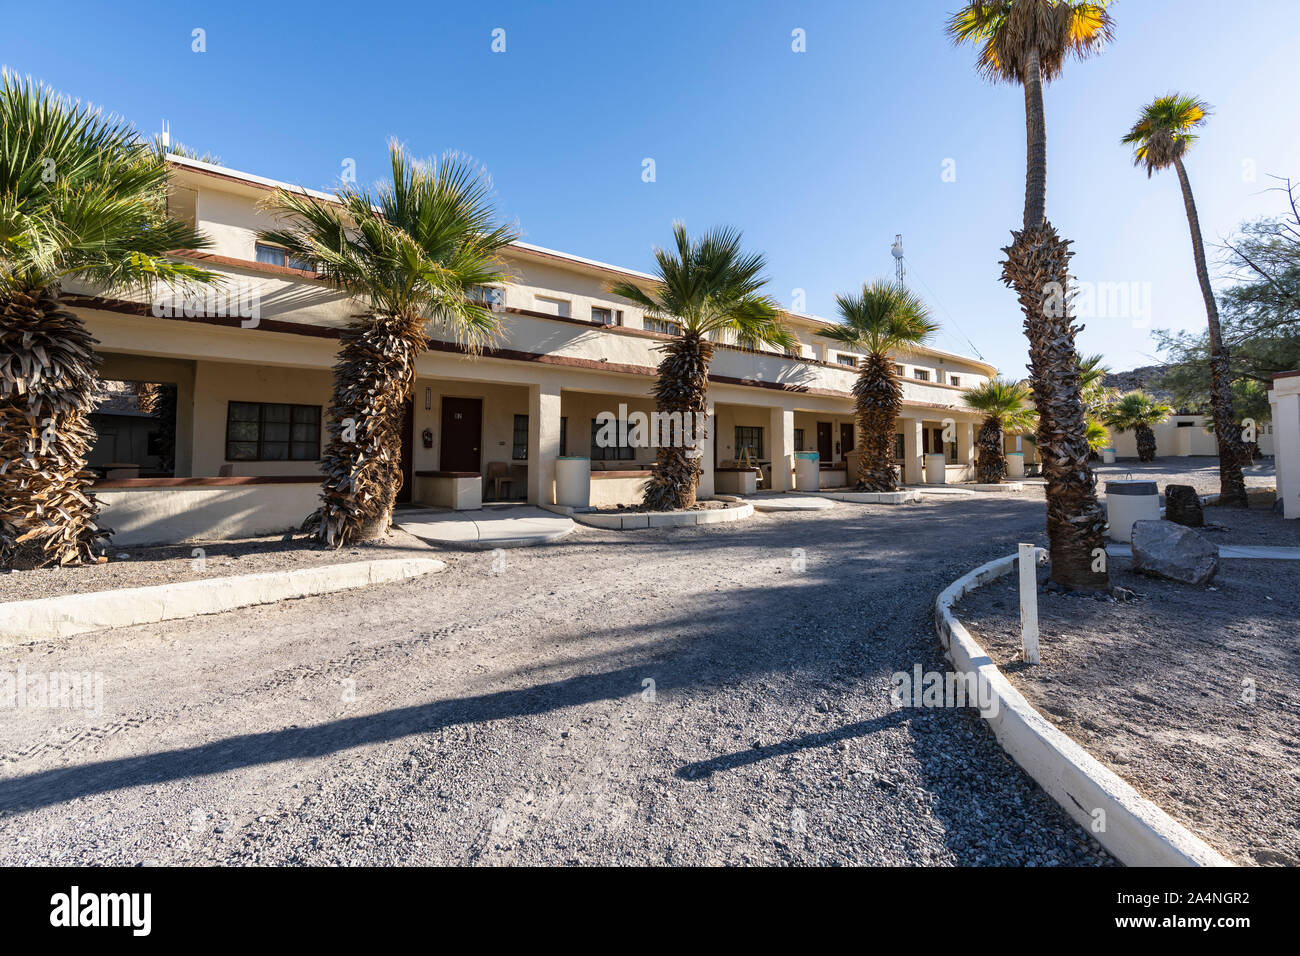 Soda Springs, California, USA - October 7, 2019:  Historic main building at the former Soda Springs Resort at the end of Zzyzx Road near the Mojave Na Stock Photo